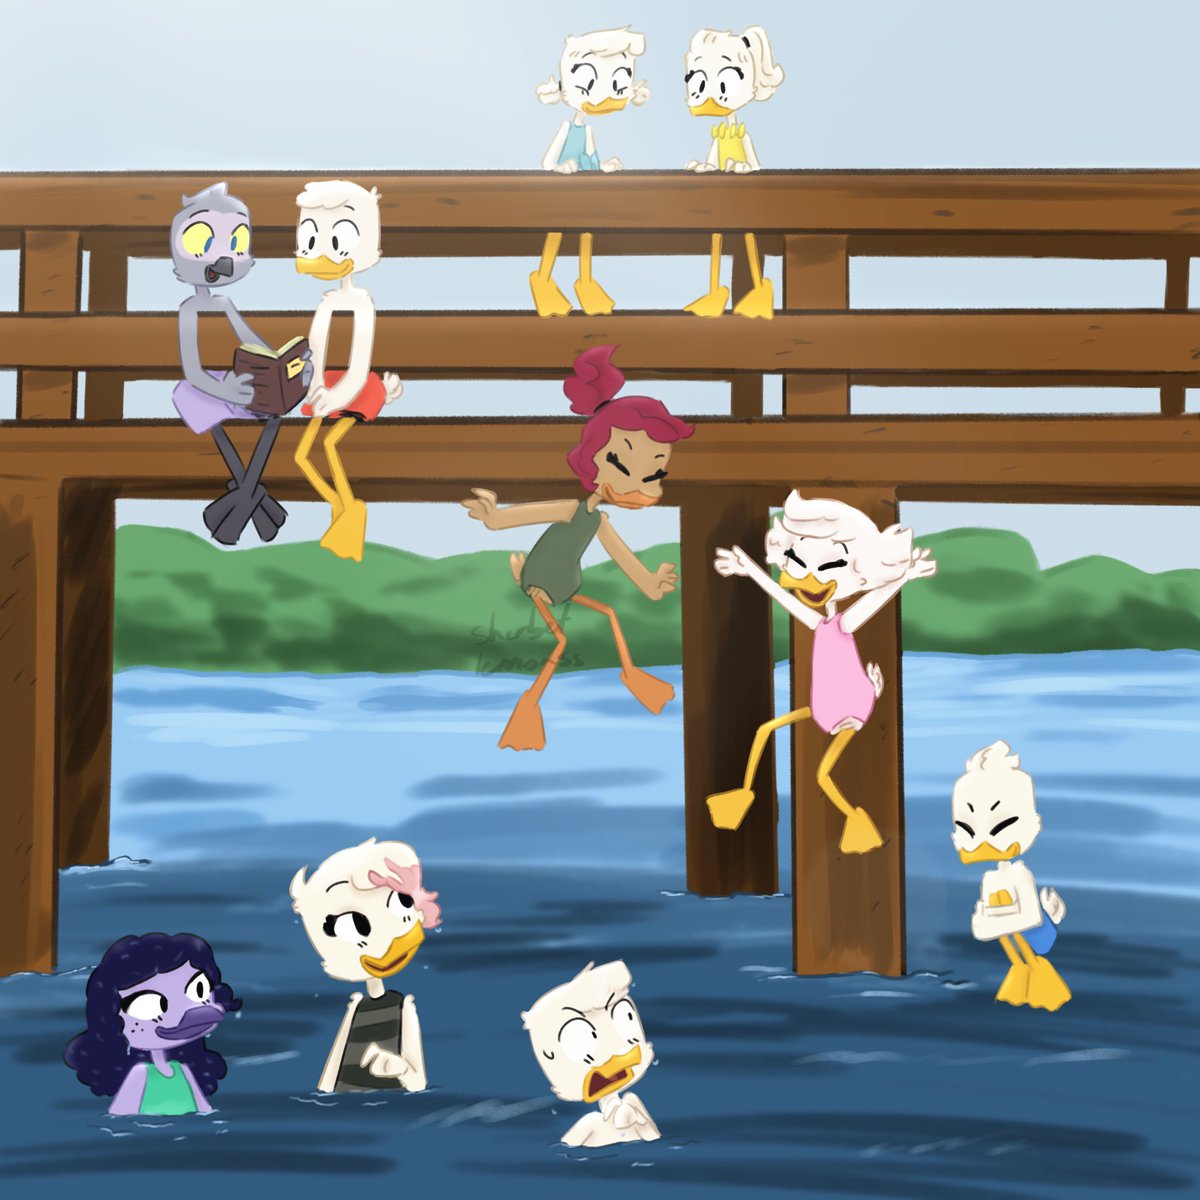 Day at the pier ☀️☀️
#ducktales